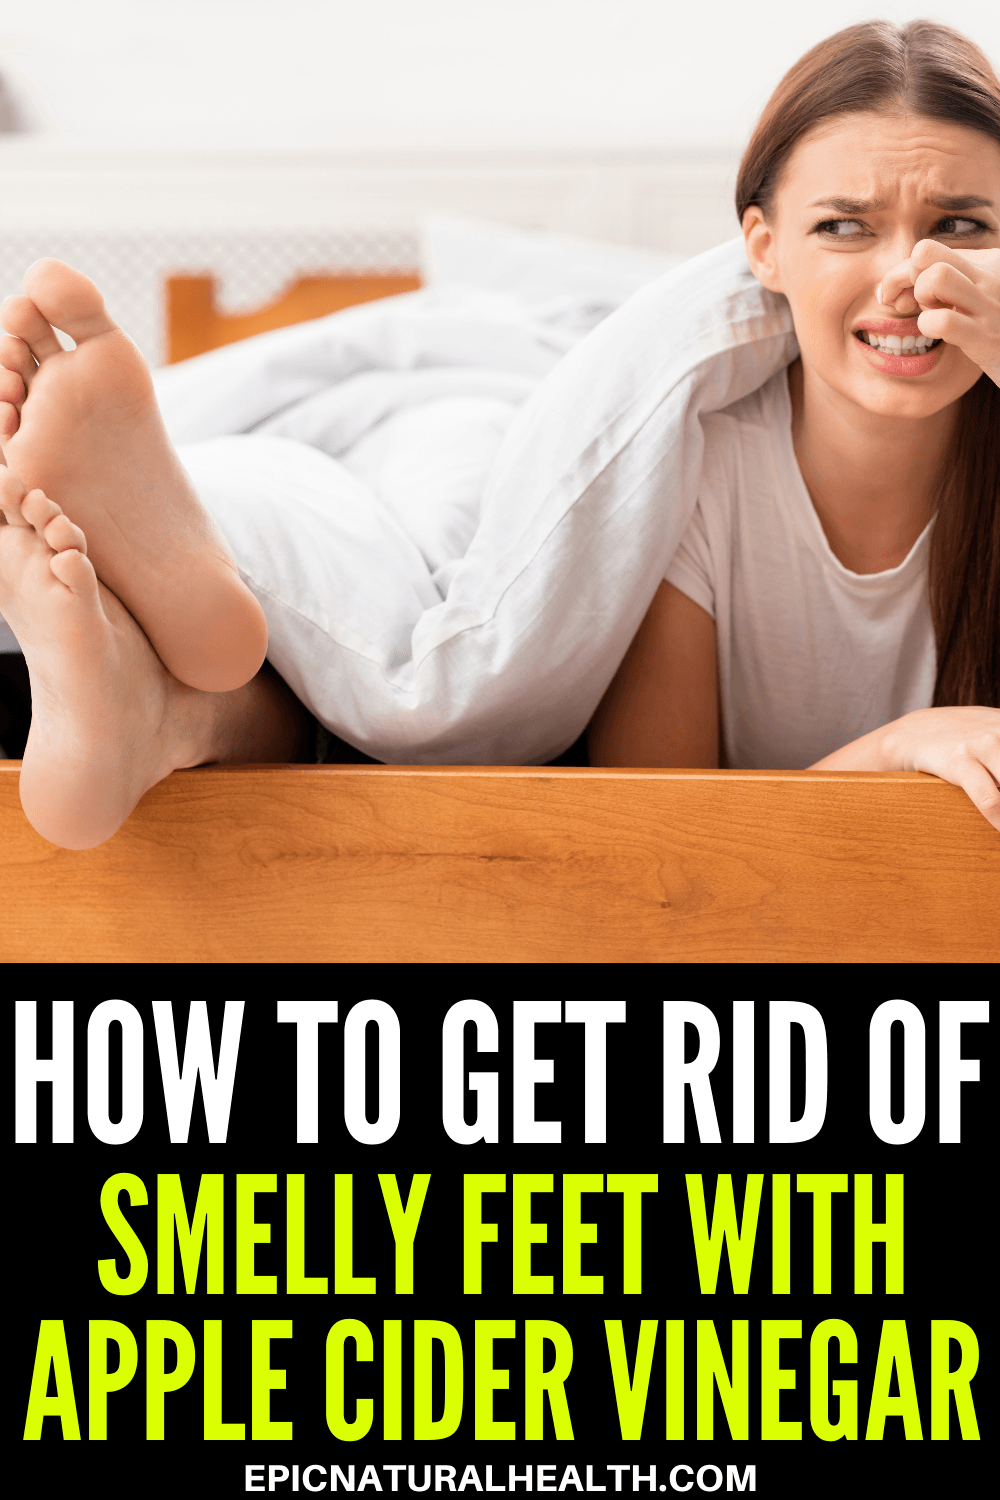 How To Get Rid of Smelly Feet With Apple Cider Vinegar pin